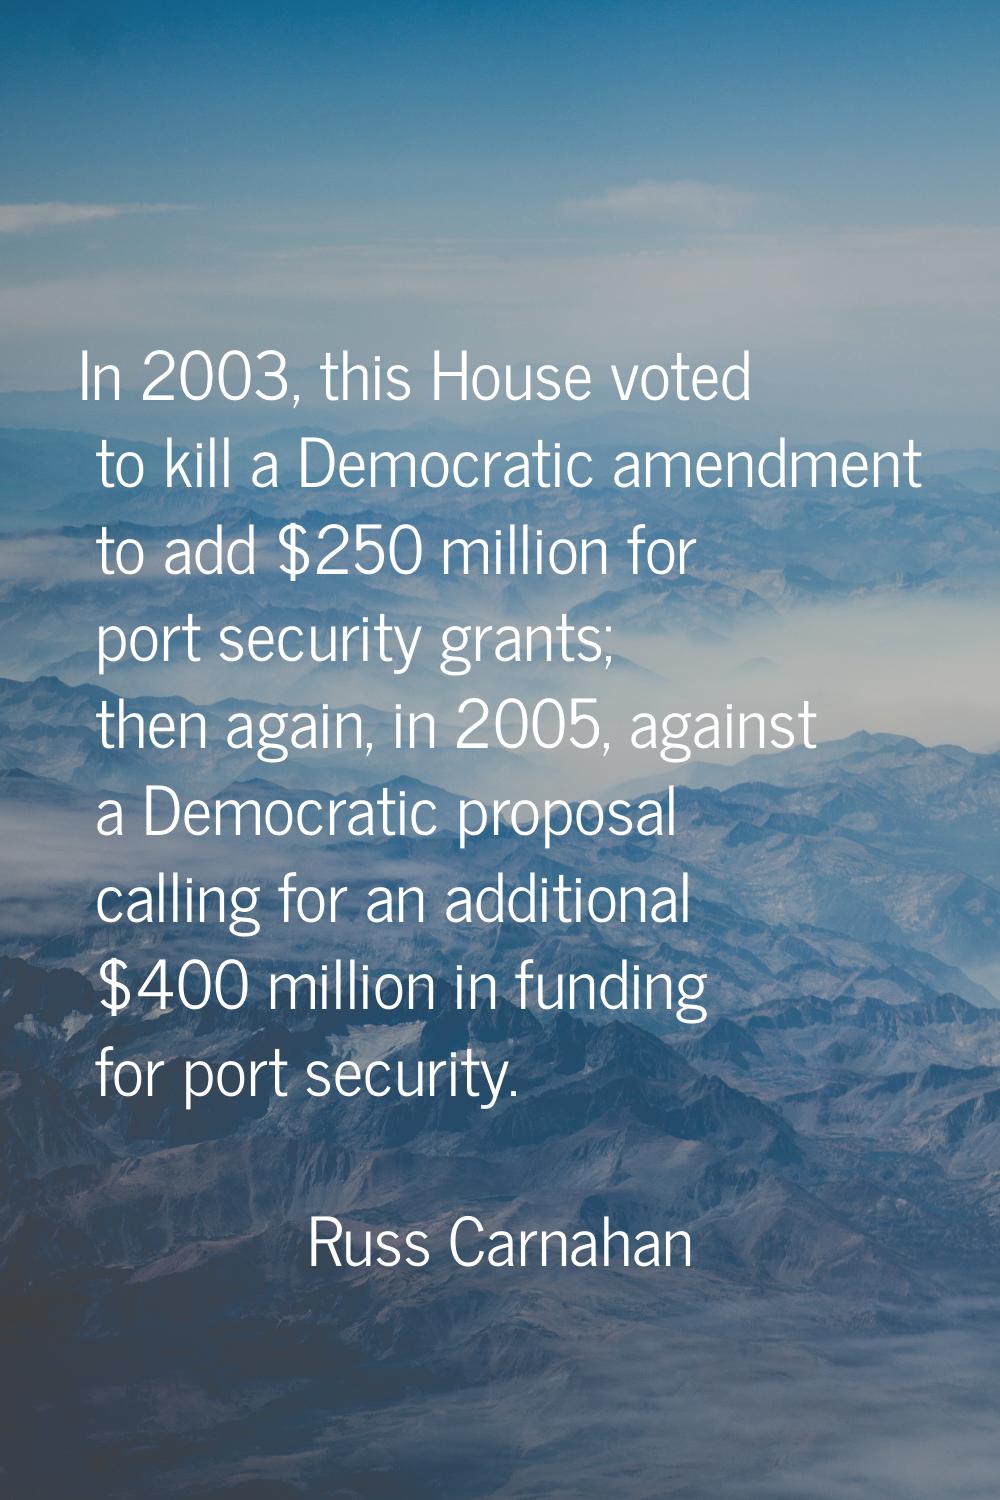 In 2003, this House voted to kill a Democratic amendment to add $250 million for port security gran